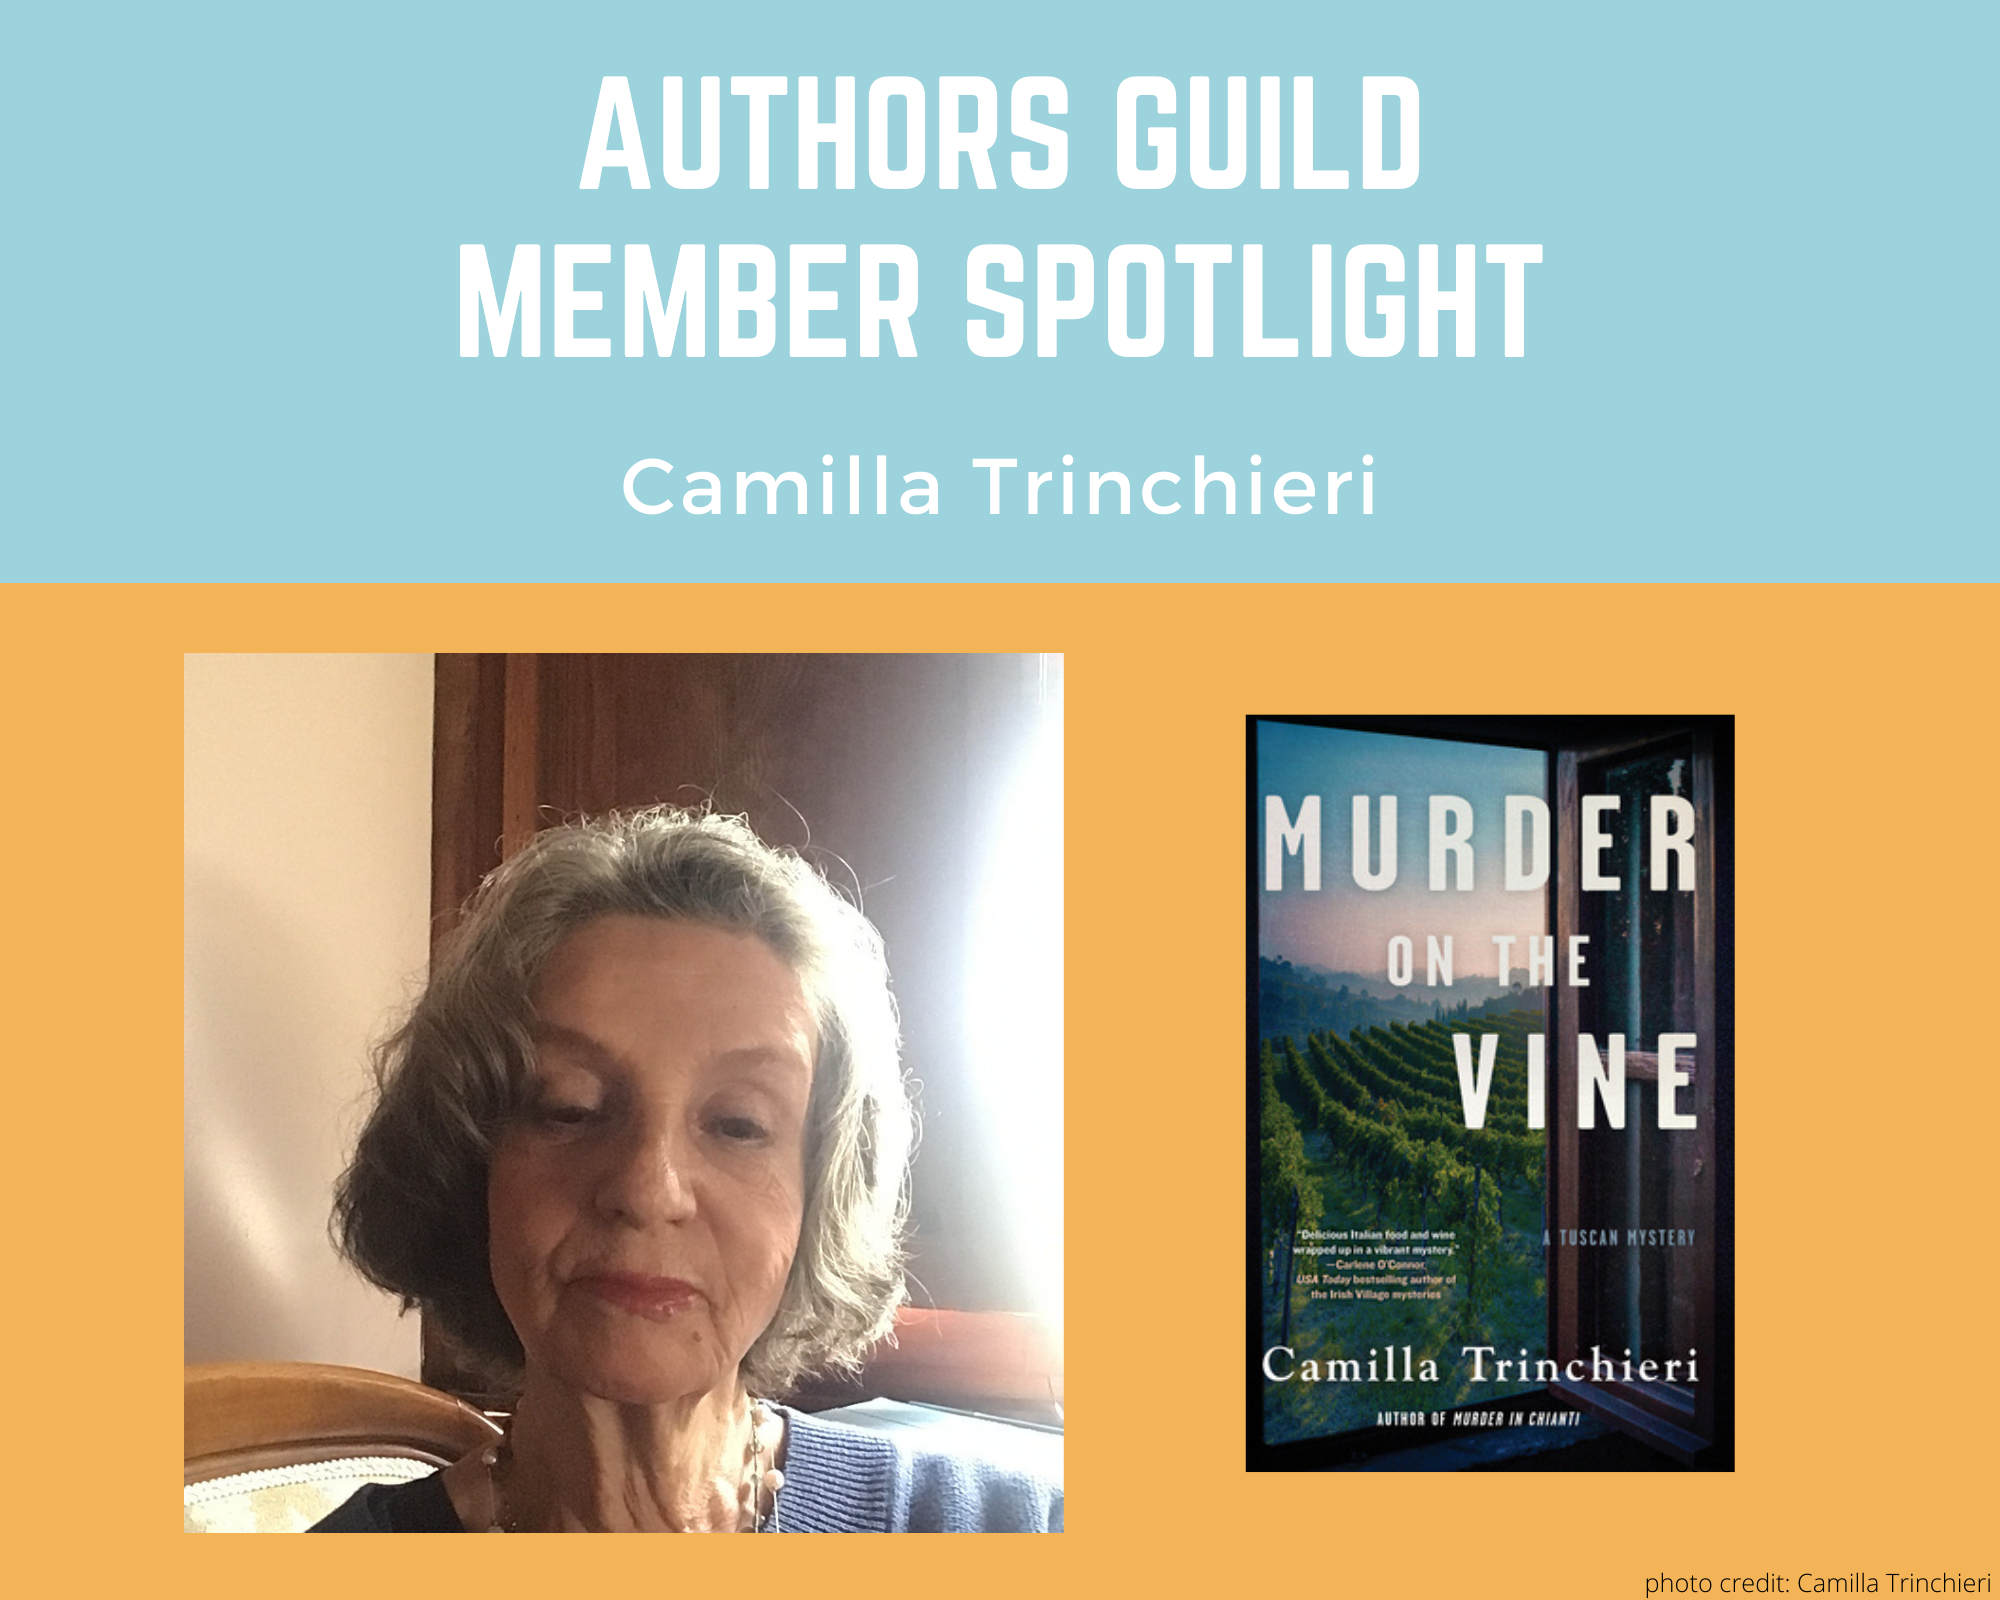 author Camilla Trinchieri looking directly at the camera and an image of her book Murder on the Vine